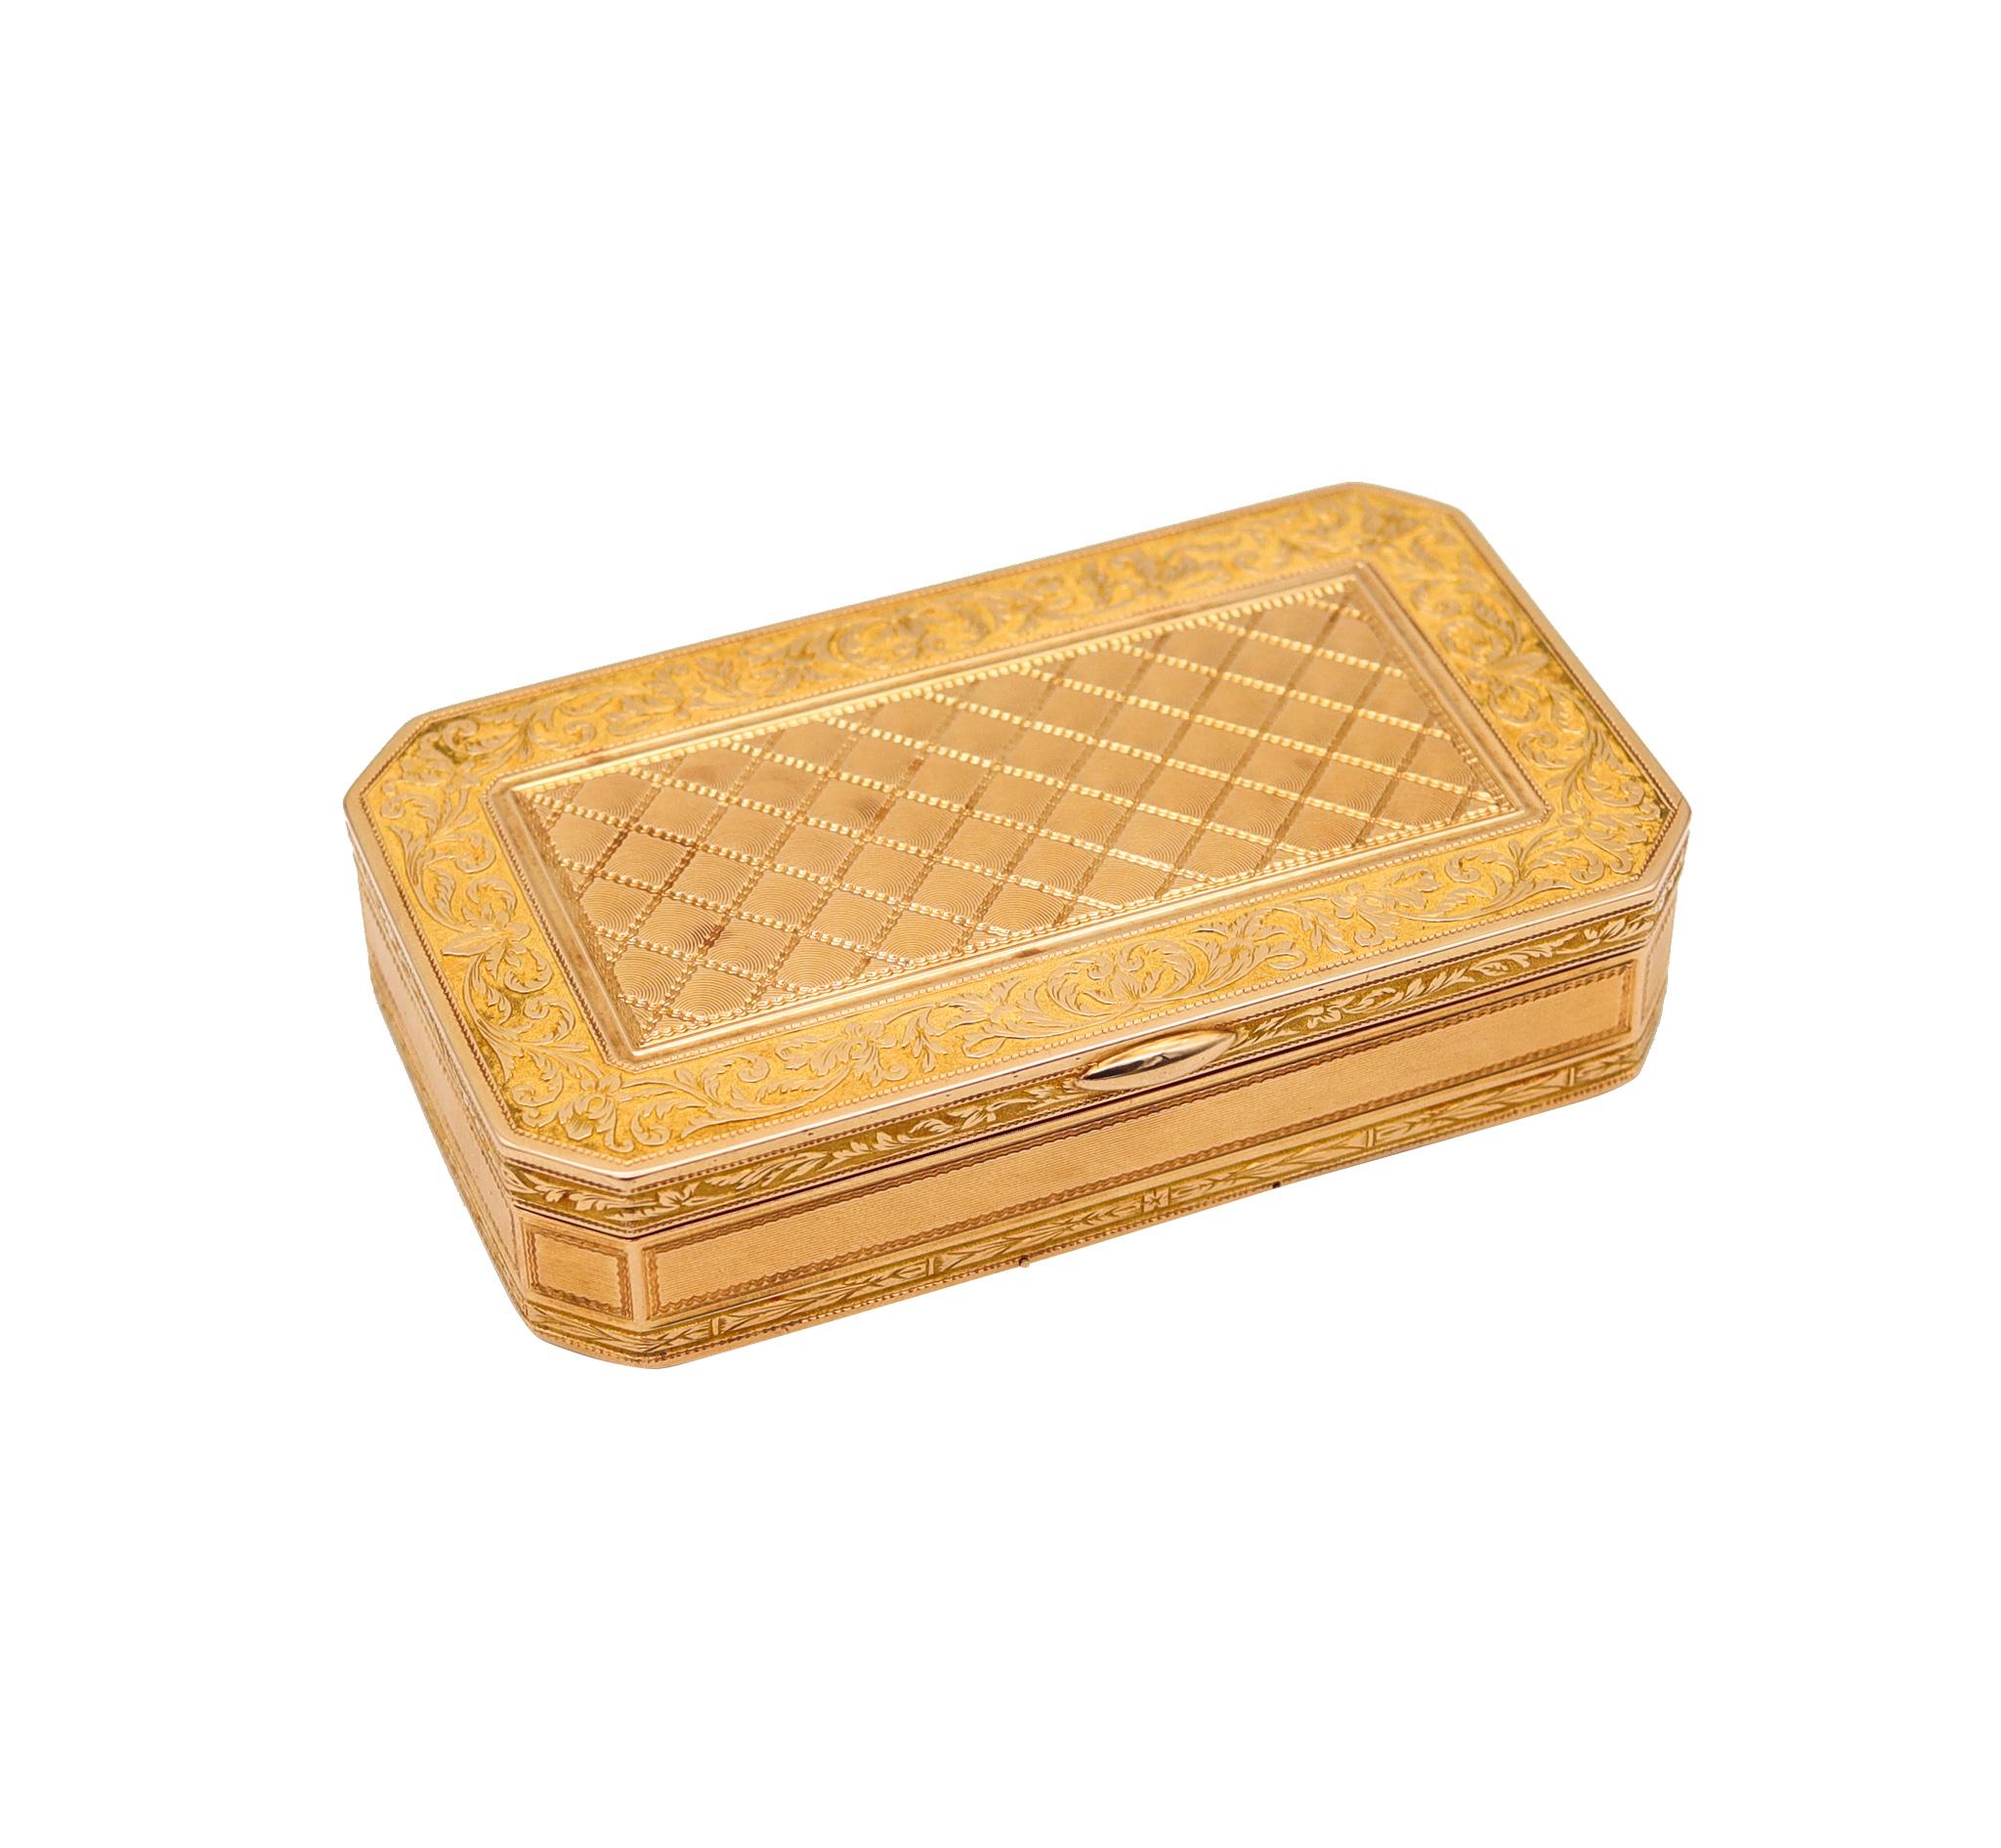 Mid-19th Century French 1819-1838 Neoclassical Louis XVI Rectangular Snuff Box Labrated 18kt Gold For Sale